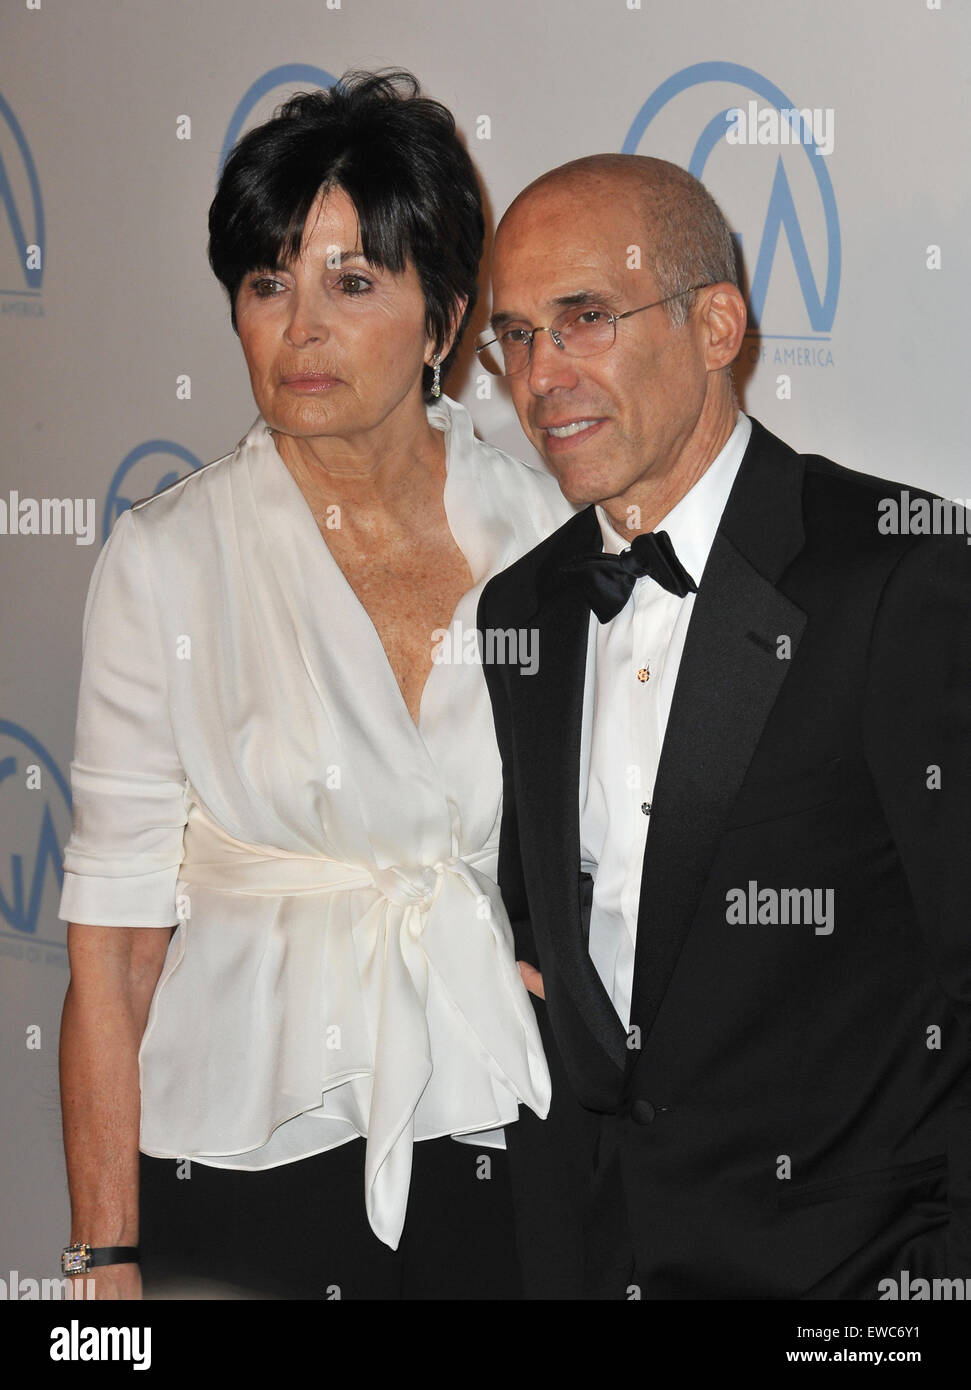 LOS ANGELES, CA - JANUARY 21, 2012: Jeffrey Katzenberg; wife at the 23rd Annual Producers Guild Awards at the Beverly Hilton Hotel. Stock Photo